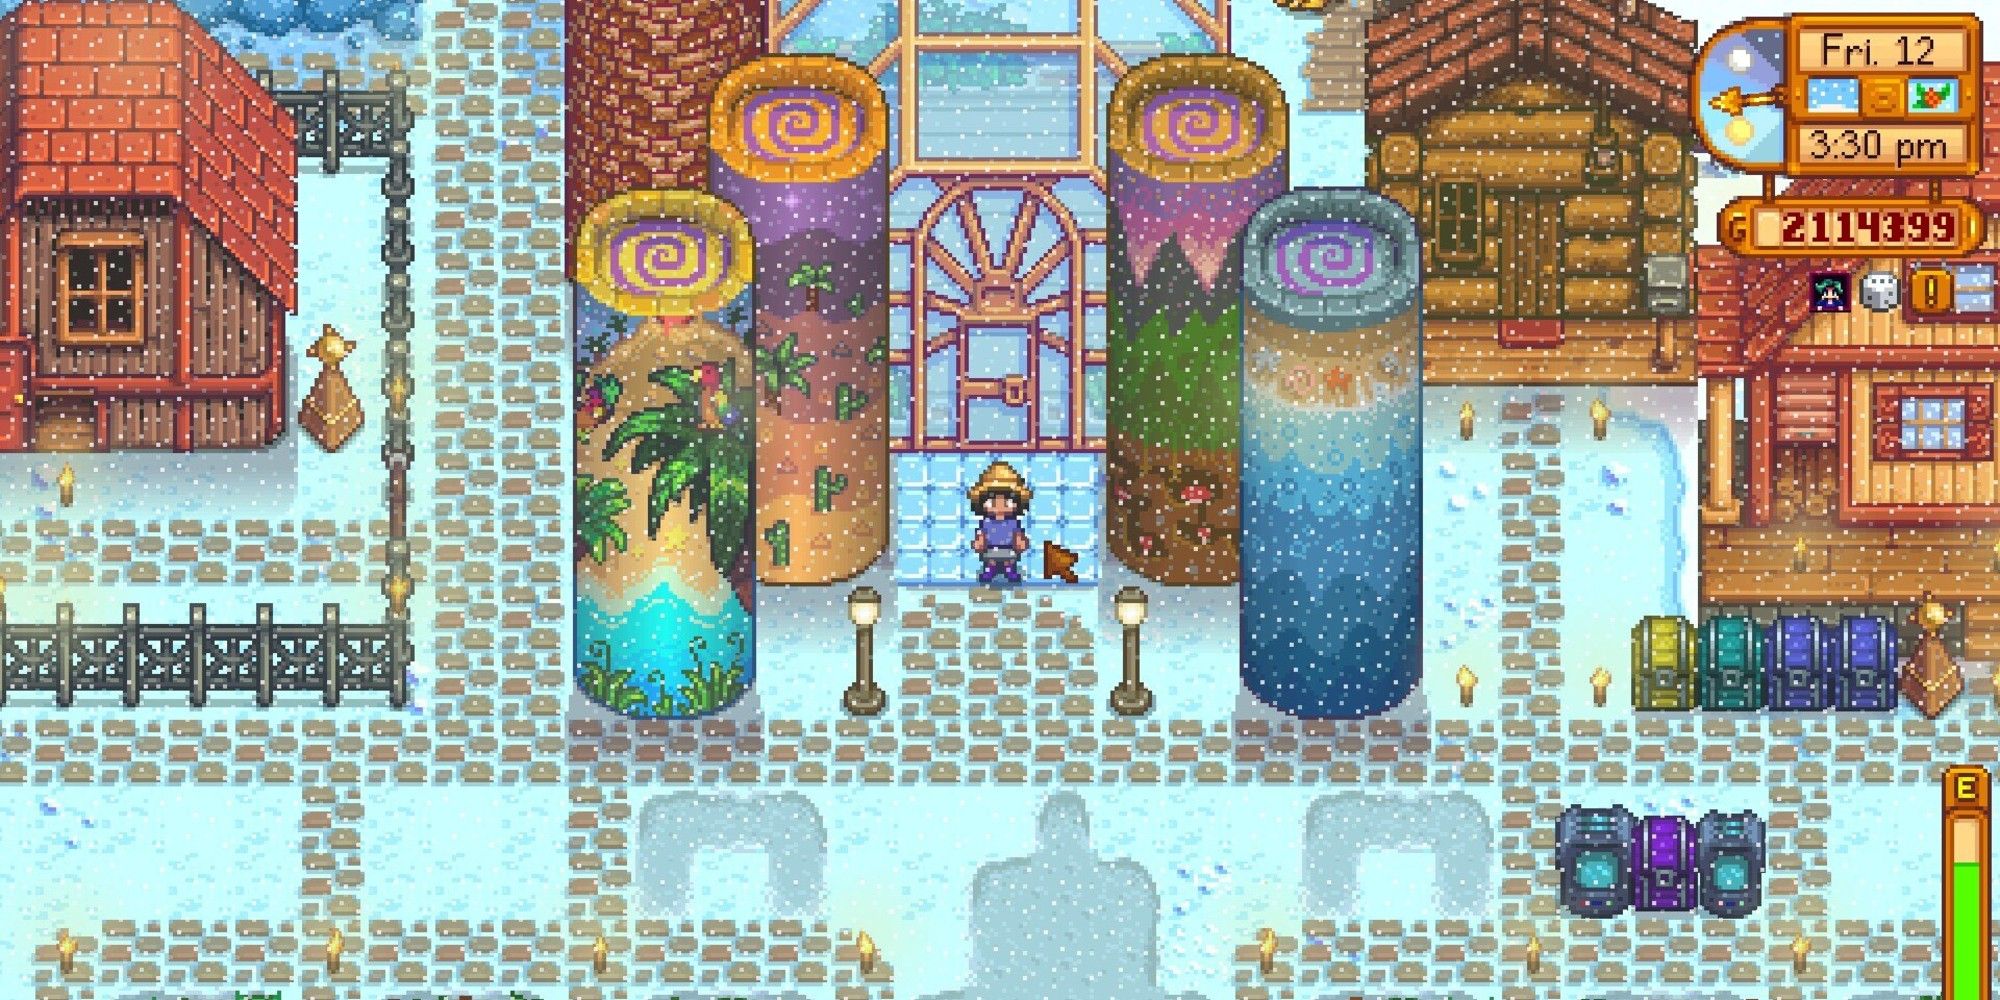 player standing next to all 4 obelisks